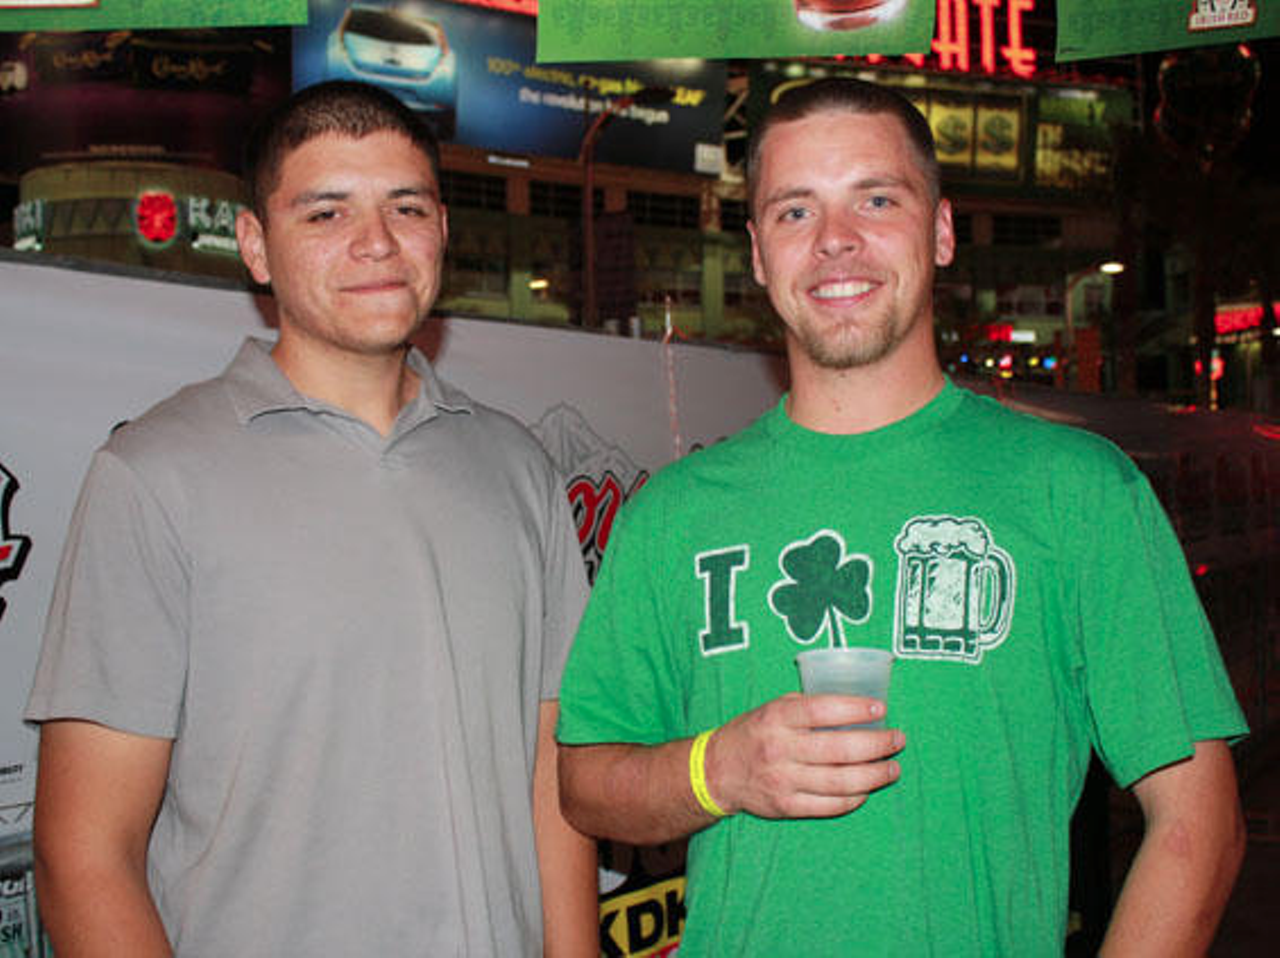 Non-sensical green t-shirts are also popular, as seen at McFadden's in Glendale, Arizona.